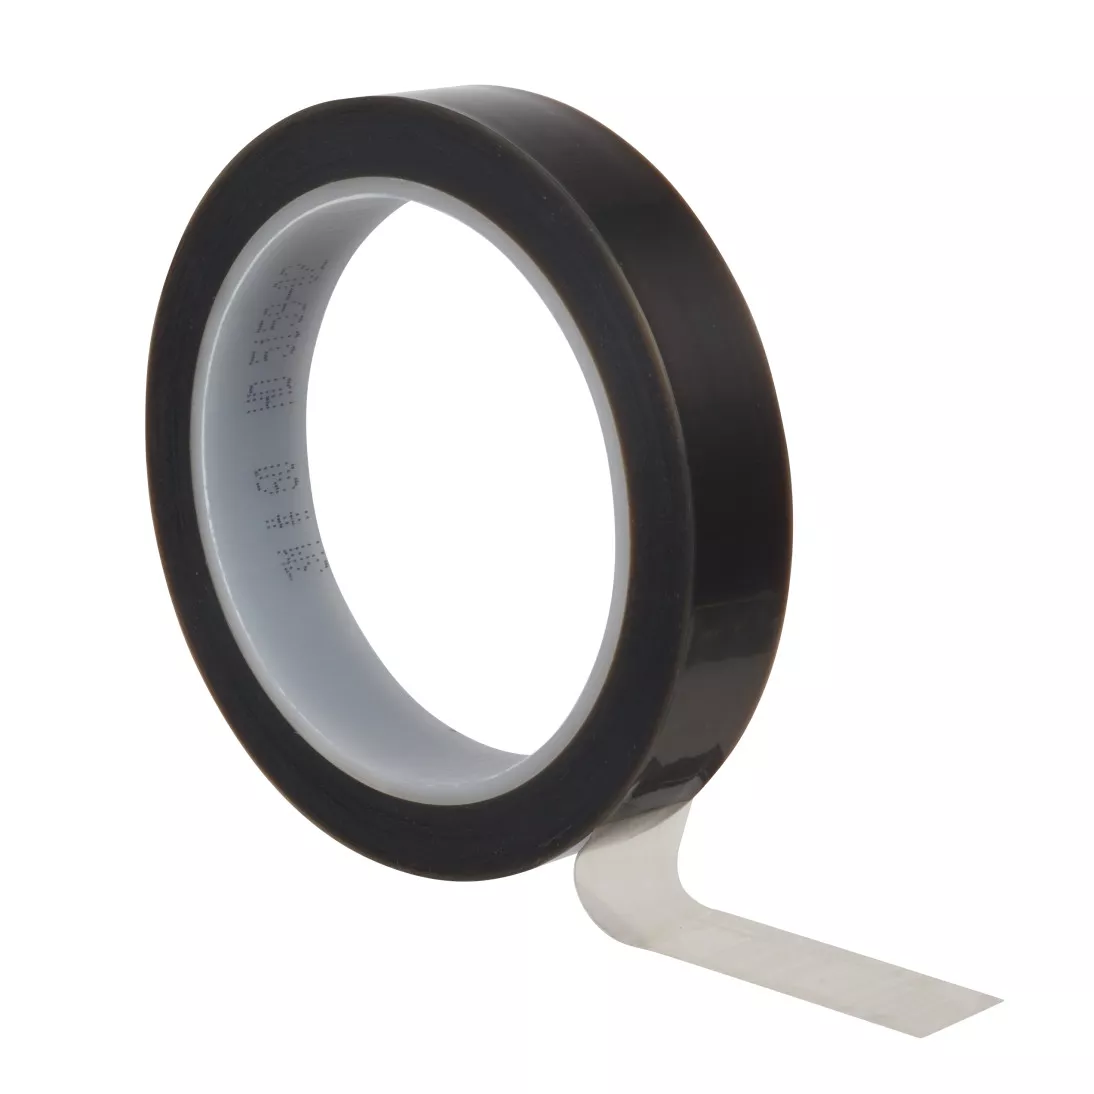 3M™ PTFE Film Electrical Tape 63, 13.5 in x 36 yd, 3 in plastic core, 1
Roll/Case